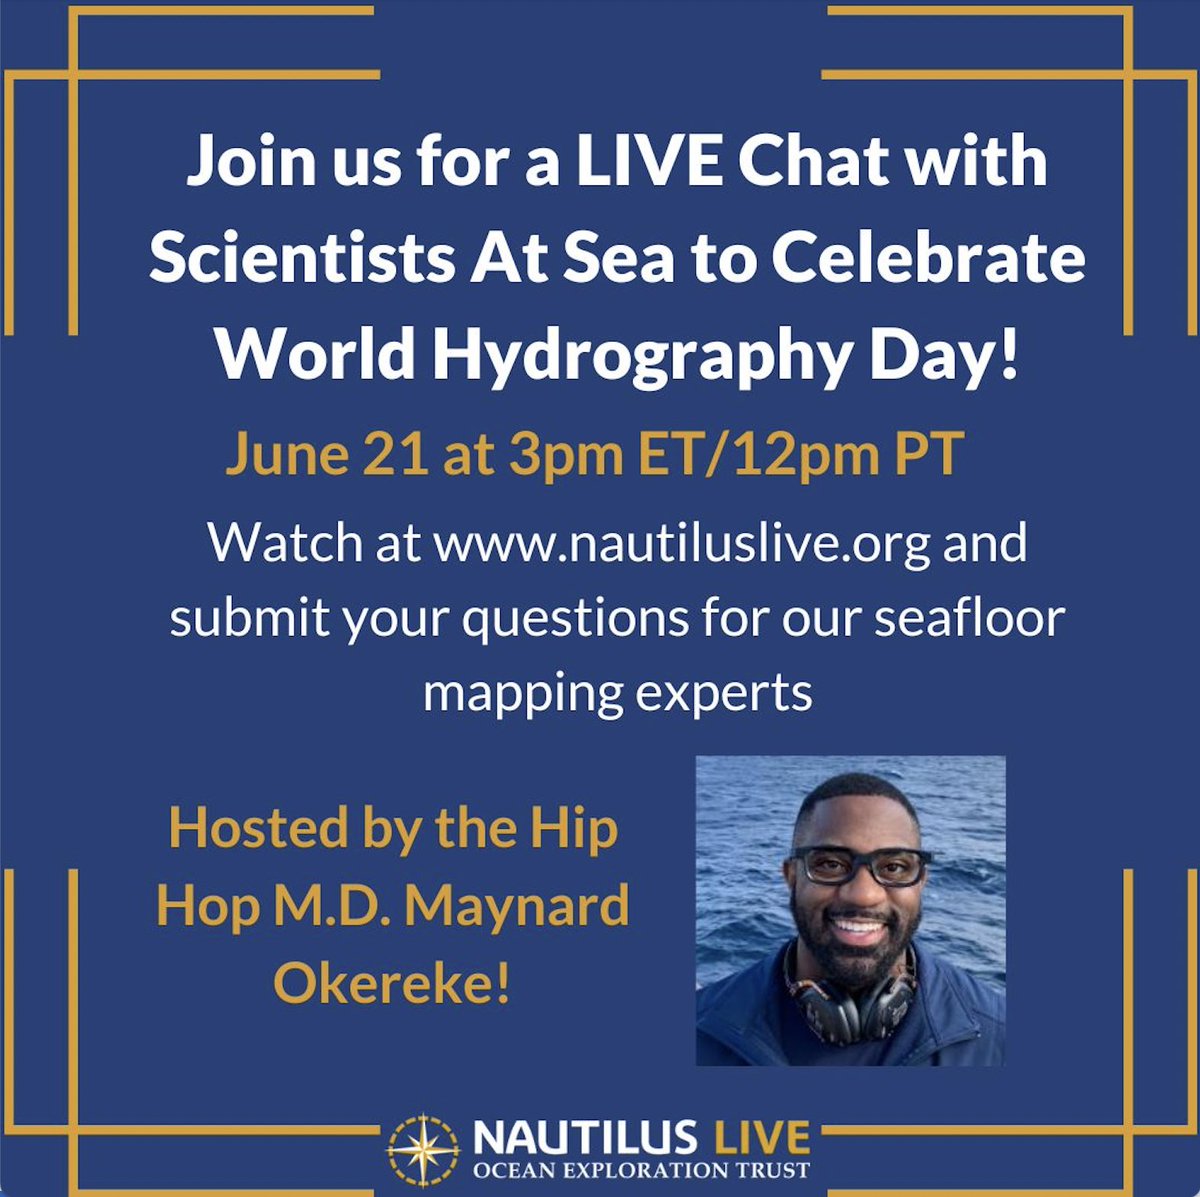 🚨 We're LIVE right now with @TheHipHopMD talking about #Hydrography! Watch and ask questions: nautiluslive.org

#WorldHydrographyDay #askascientist #livescience